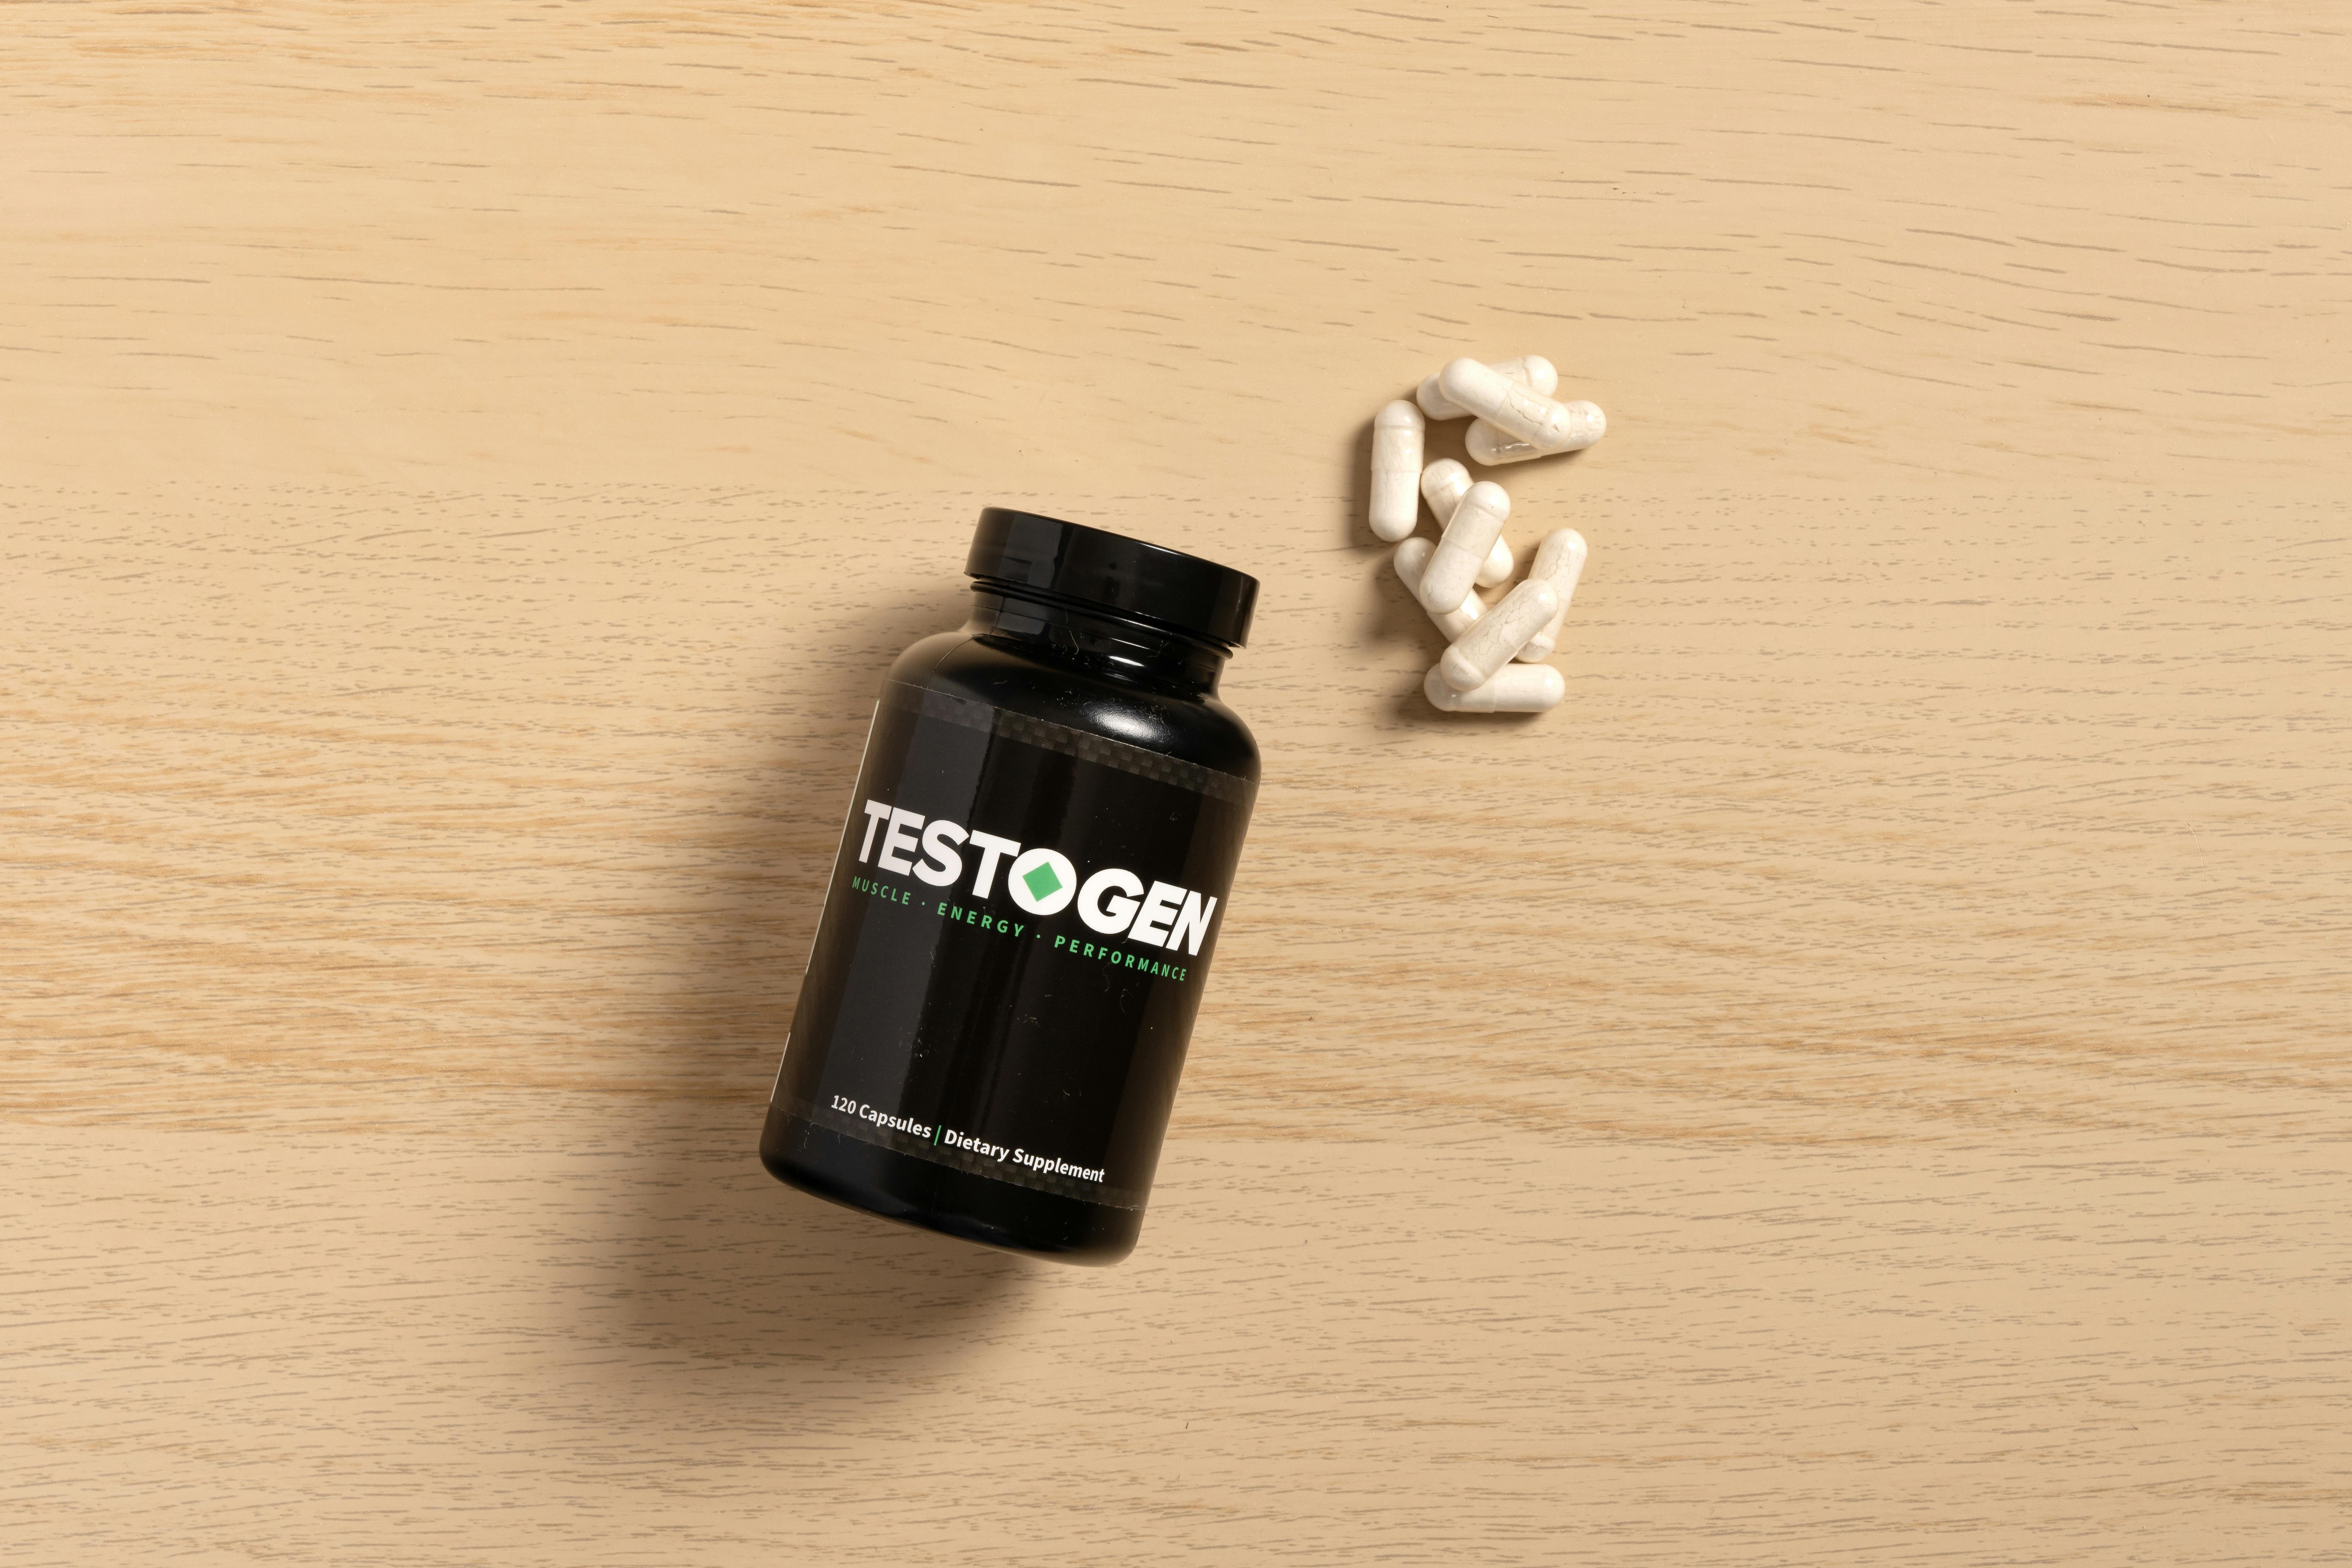  Testosterone Booster for Men Six Star Pro Nutrition Test Booster  for Men Extreme Strength + Enhances Training Performance + Scientifically  Researched Test Boost Supplement, 60 Pills